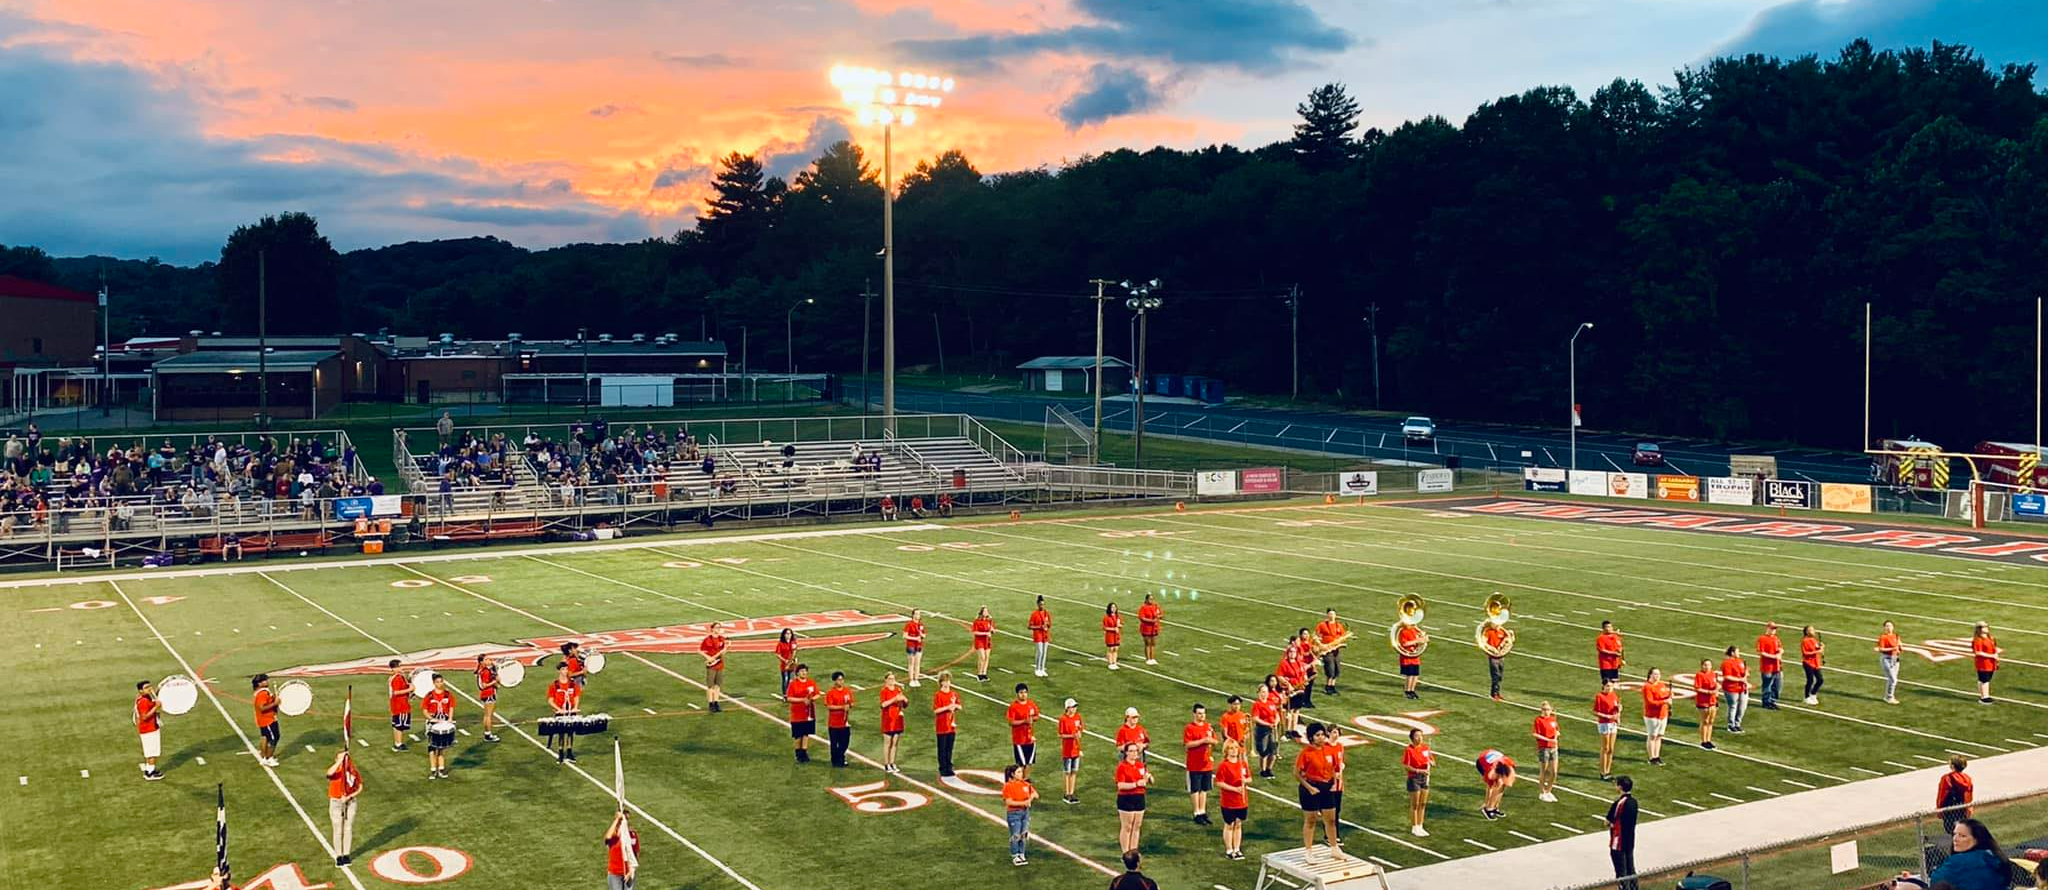 Marching band on the football field during a sunrise.